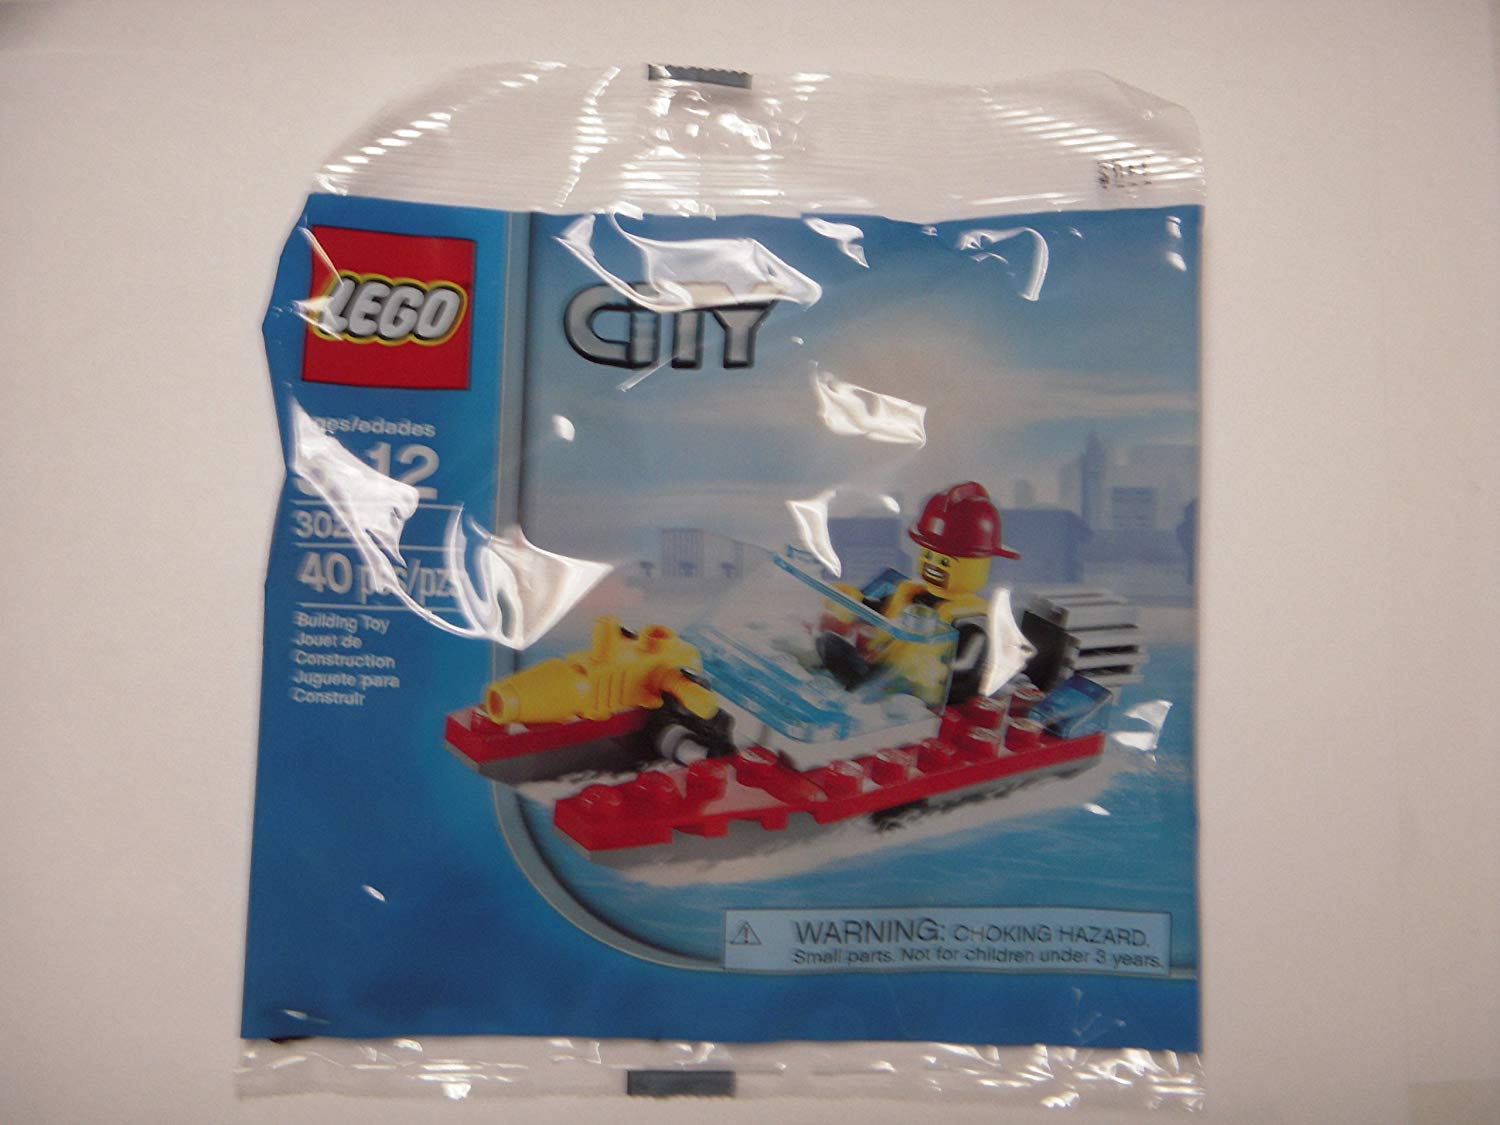 Lego 30220 Firefighter With 40 Teilges Boat Playset